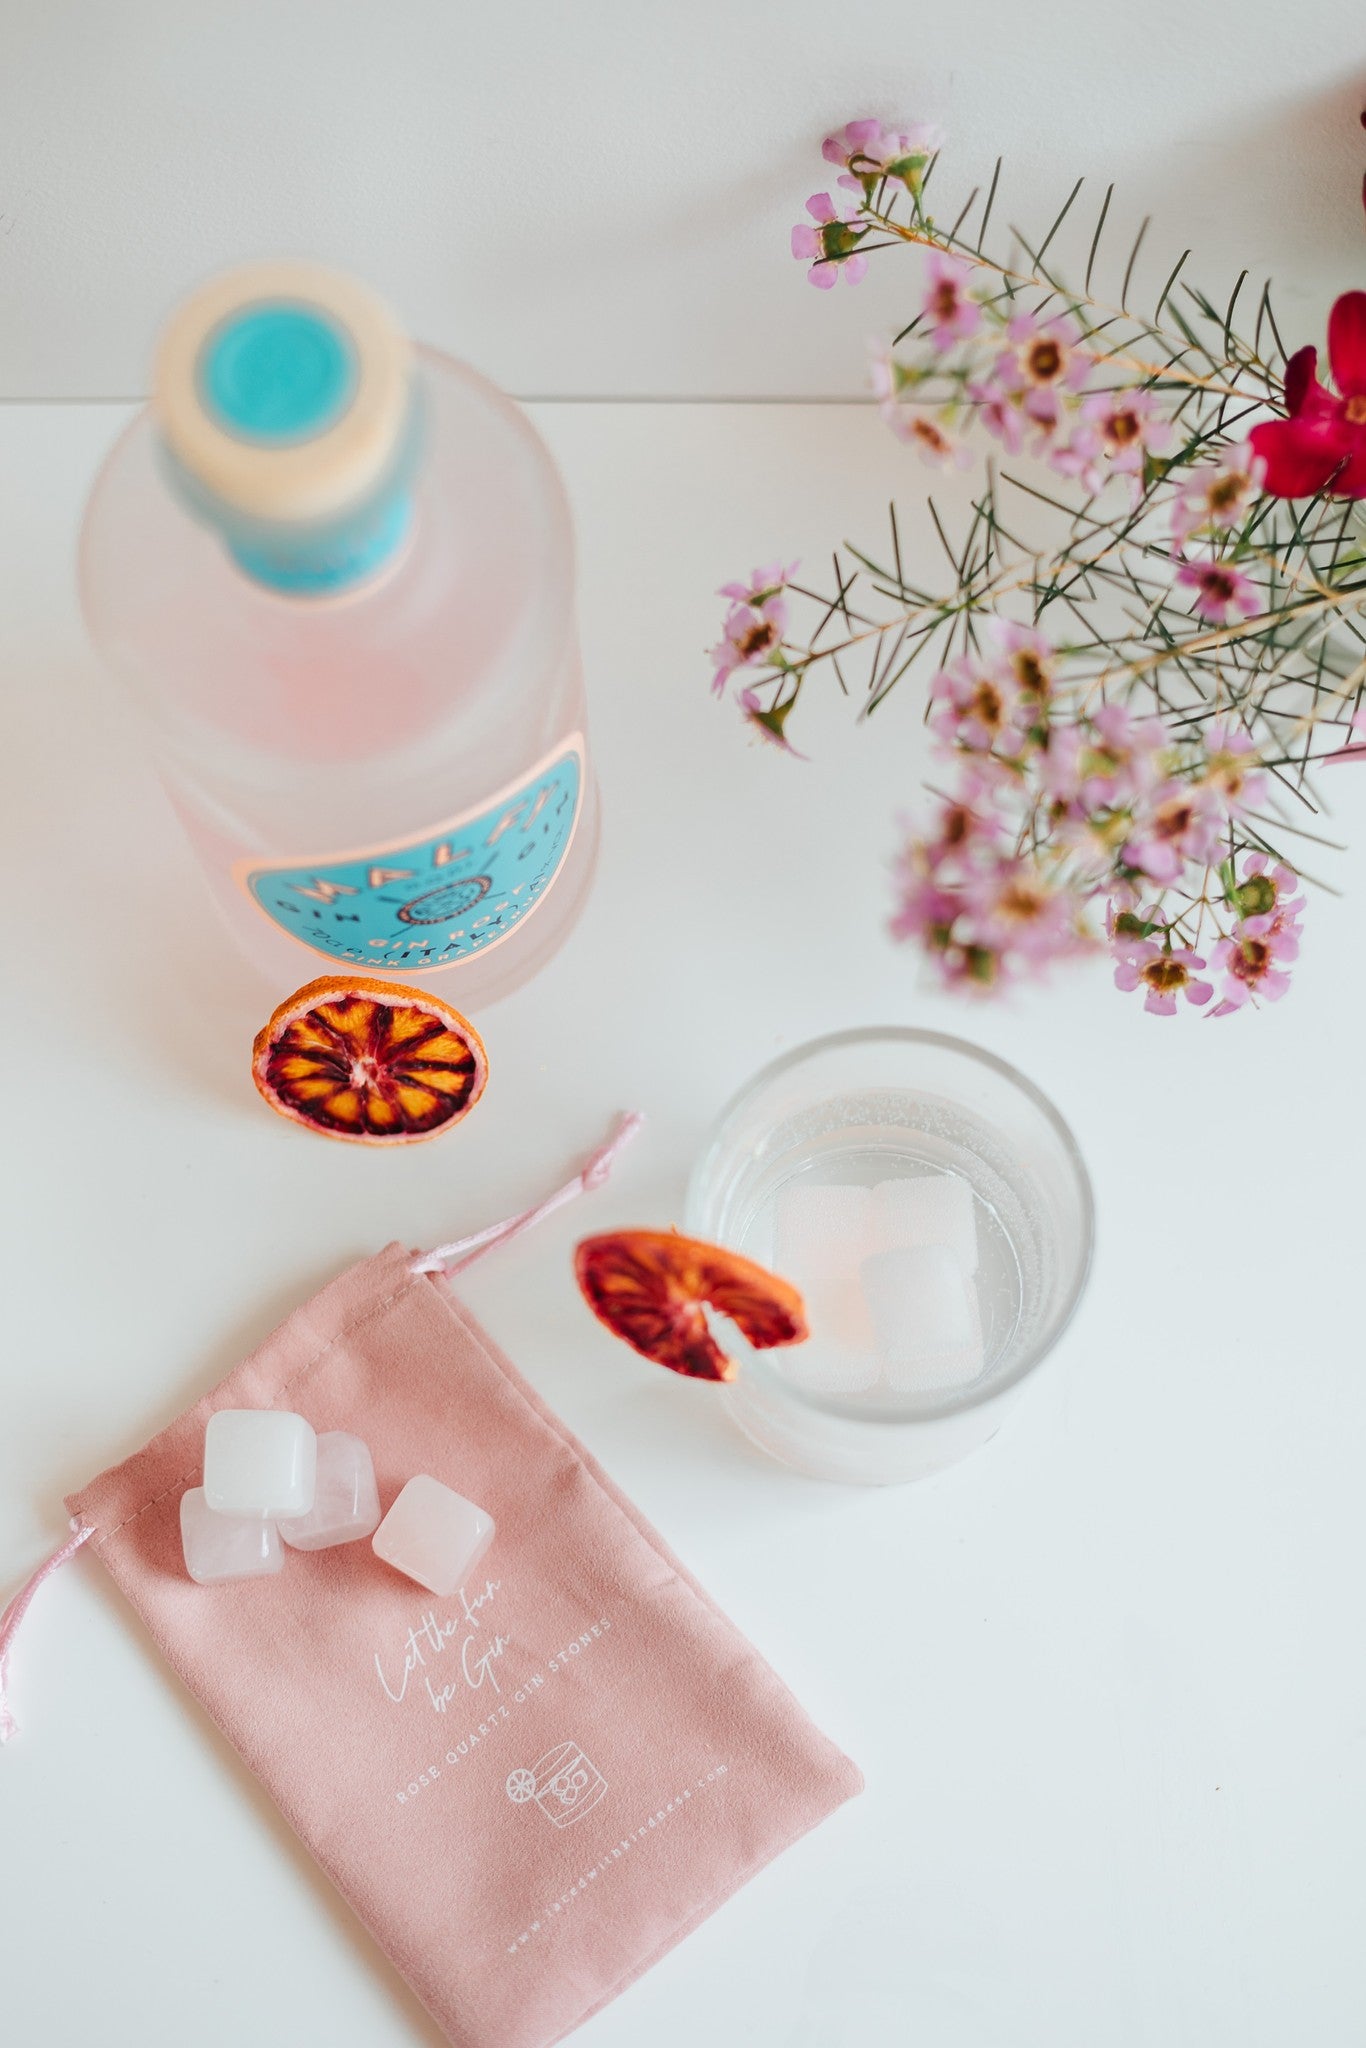 Rose Quartz Gin Stones with pouch; a glass and bottle of pink gin 